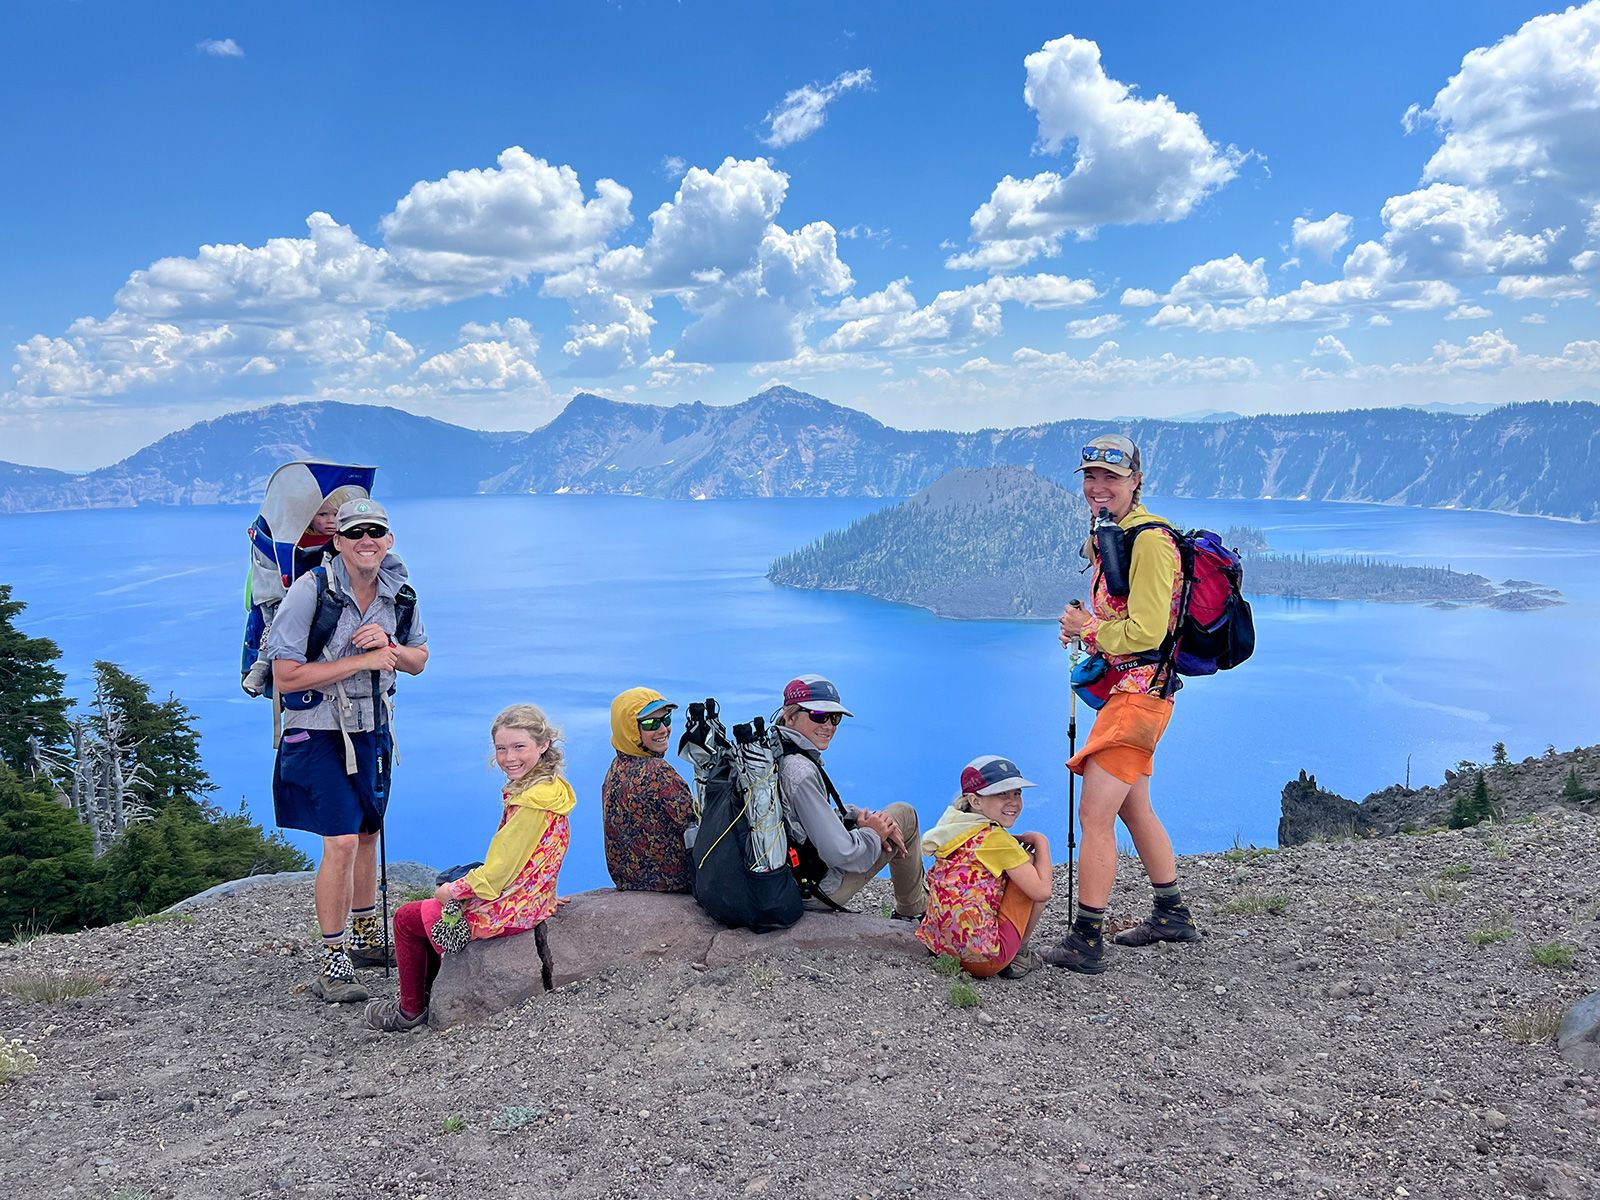 The parents hiking America's longest trails with five kids